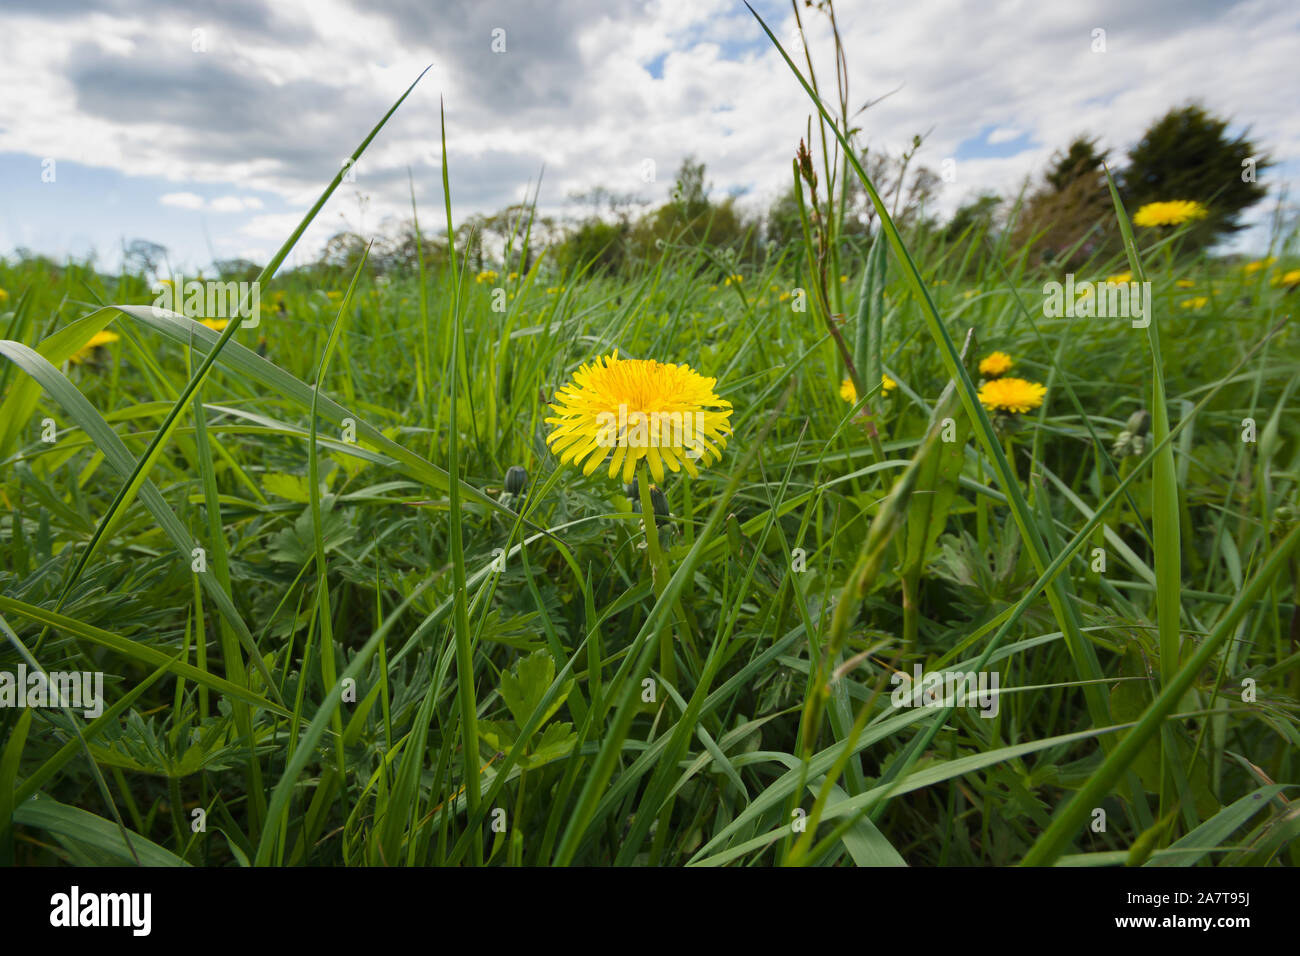 Dandelions latin name Taraxacum officinale in an overgrown weed filled garden or meadow Stock Photo